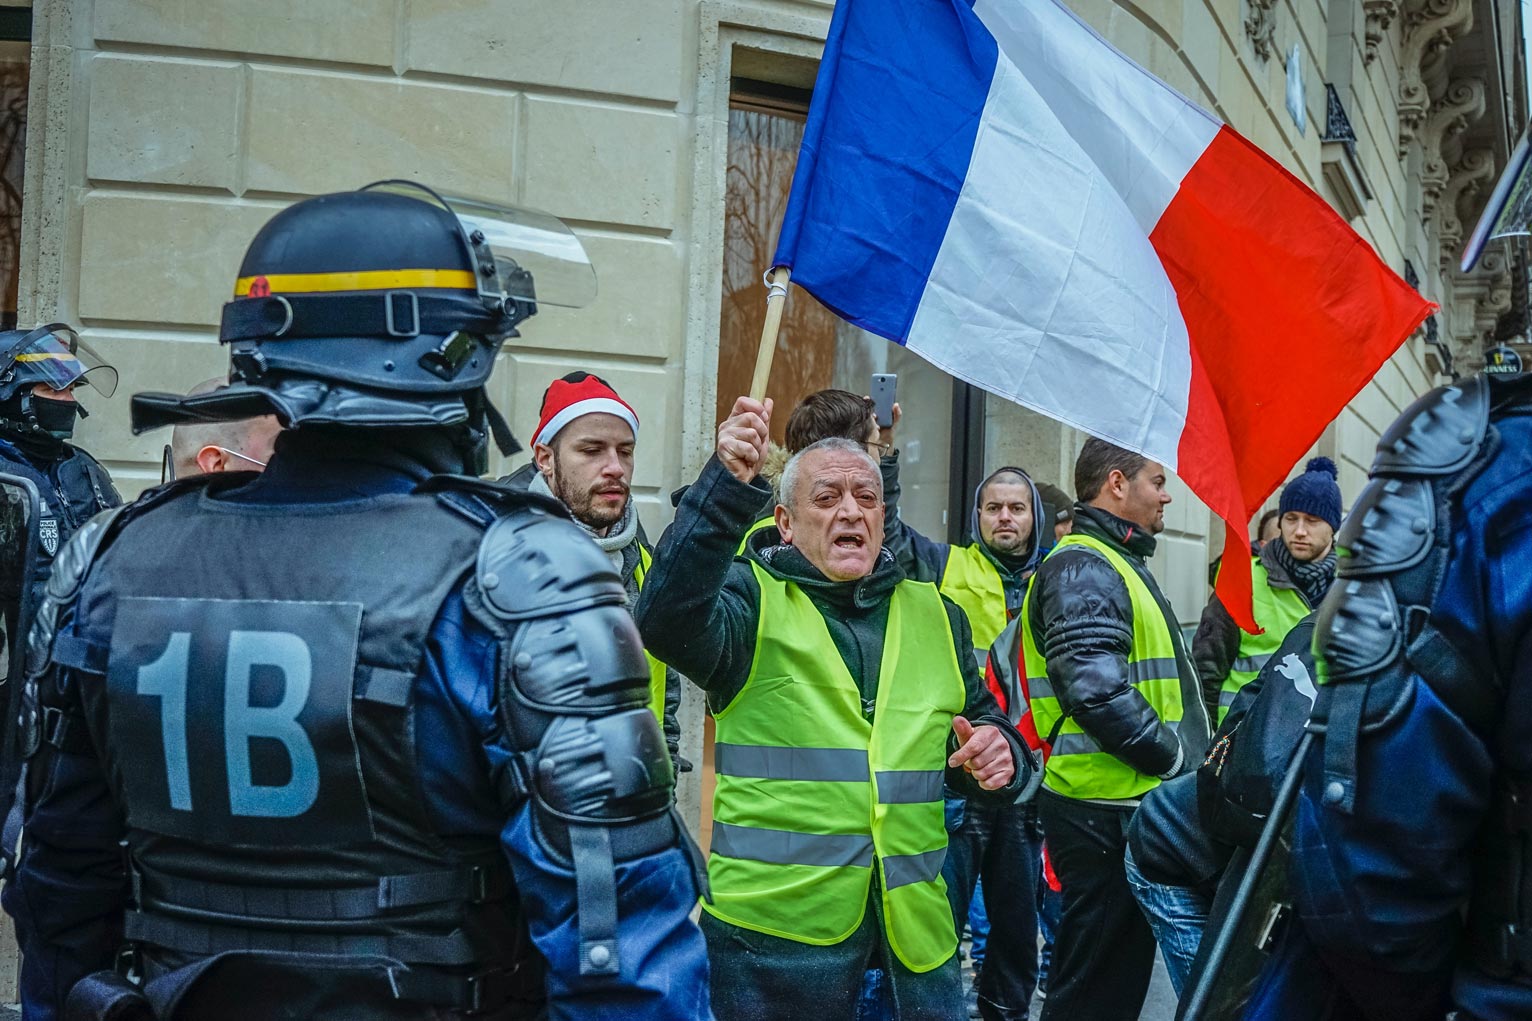 Members of the Yellow Vest Movement demonstrated occasionally every weekend from late 2018 until spring 2019. Their identification mark was yellow vests.